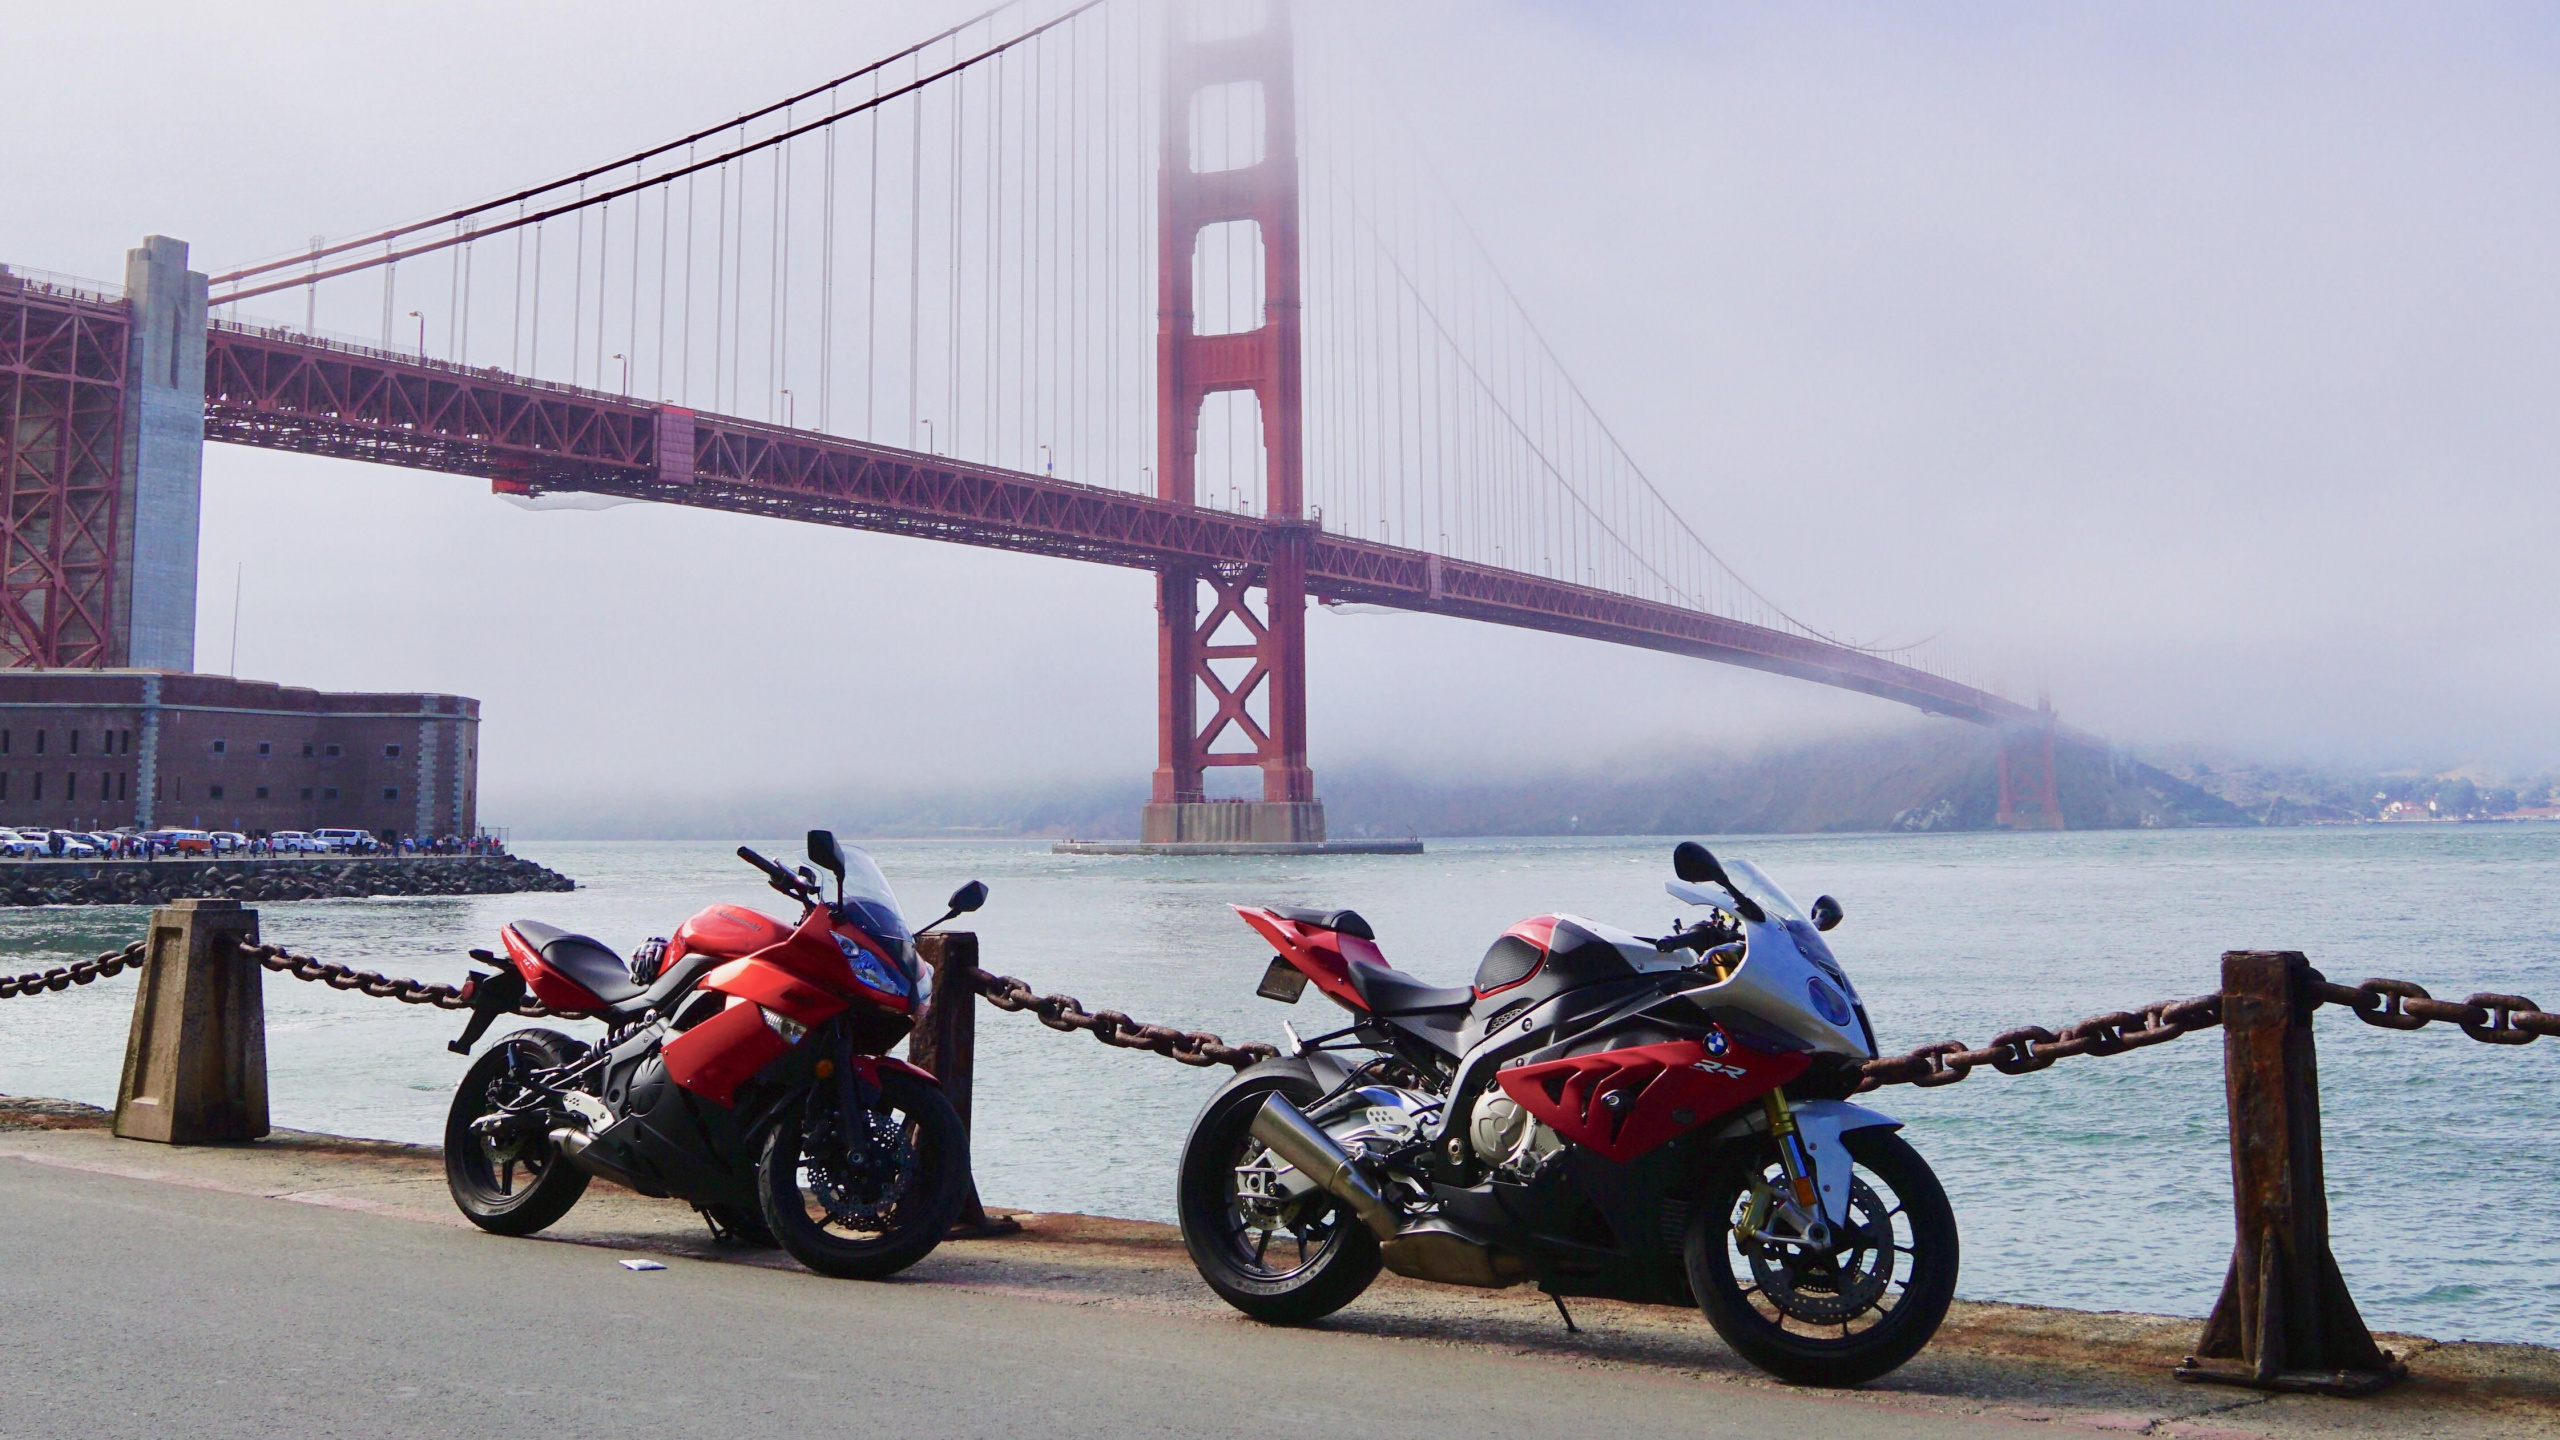 Red and Black Motorcycle Near Golden Gate Bridge. Wallpaper in 2560x1440 Resolution